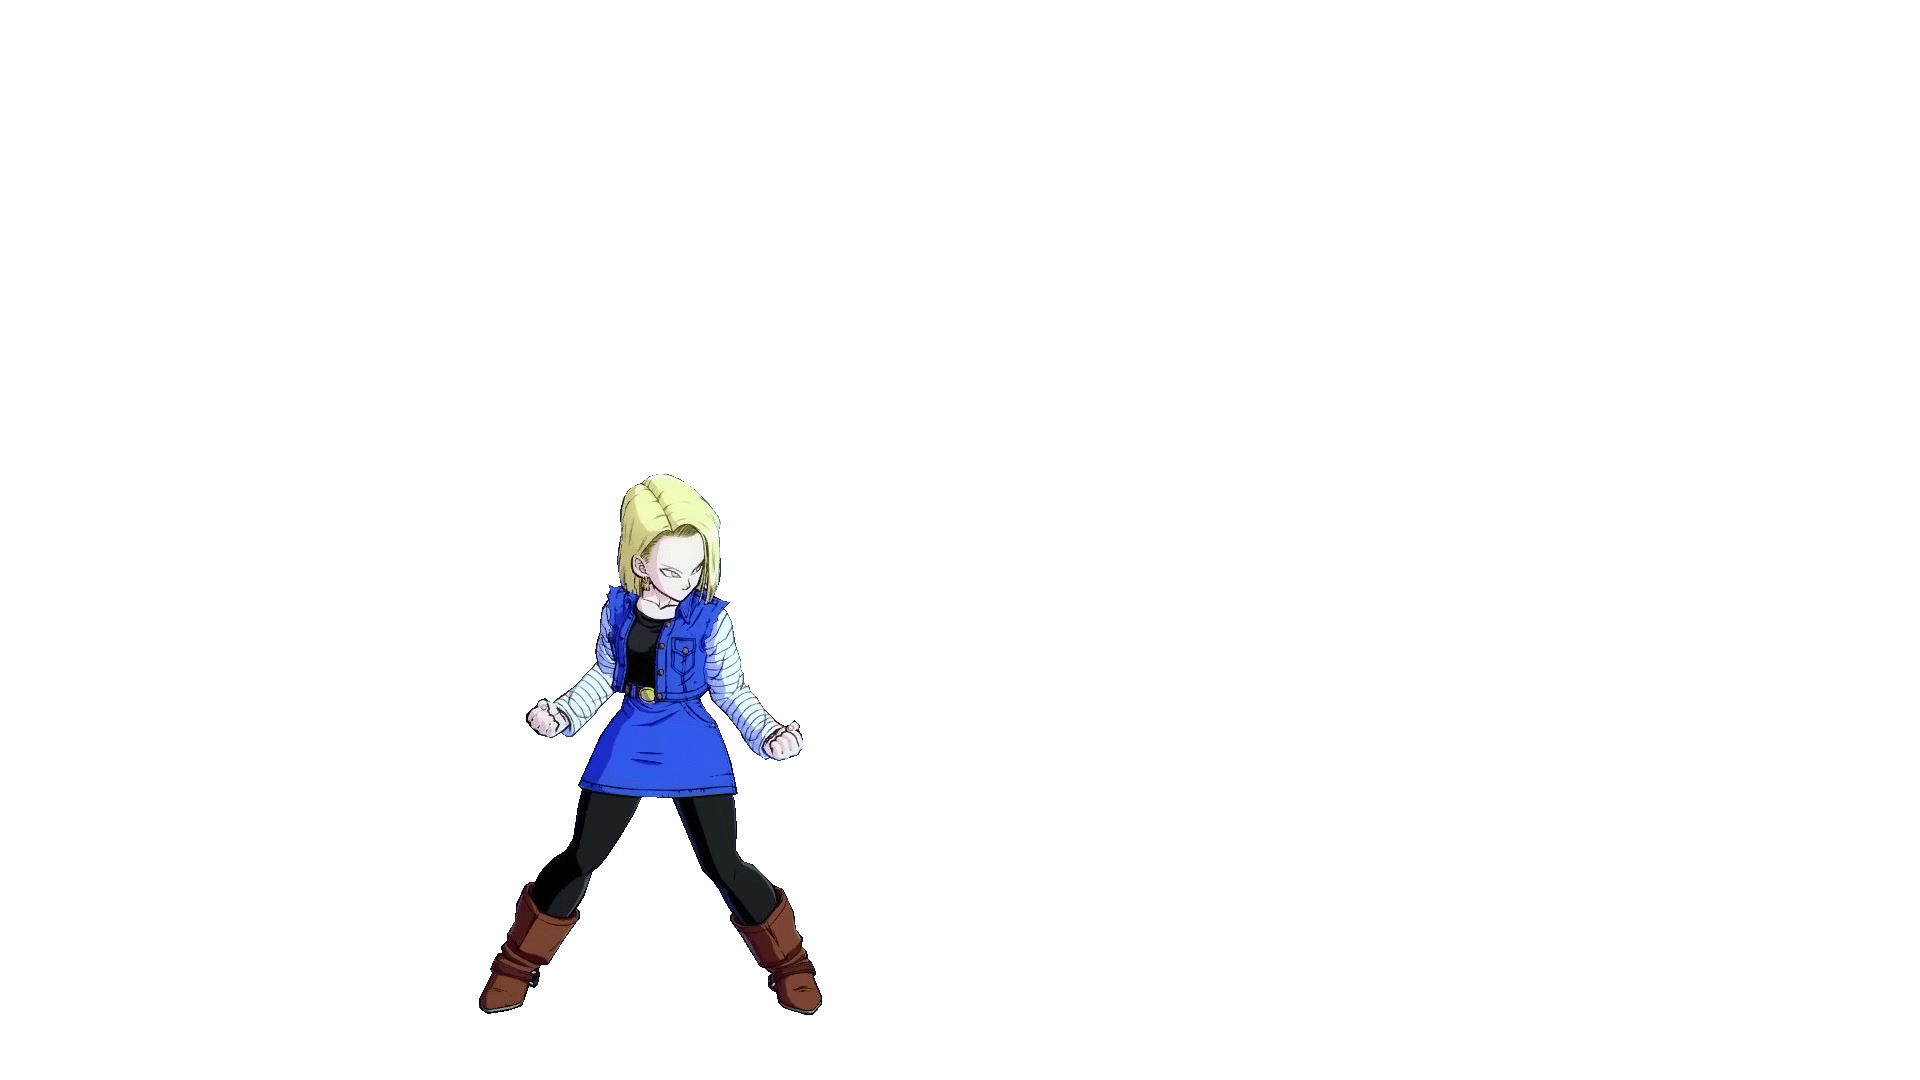 DBFZ Android 18